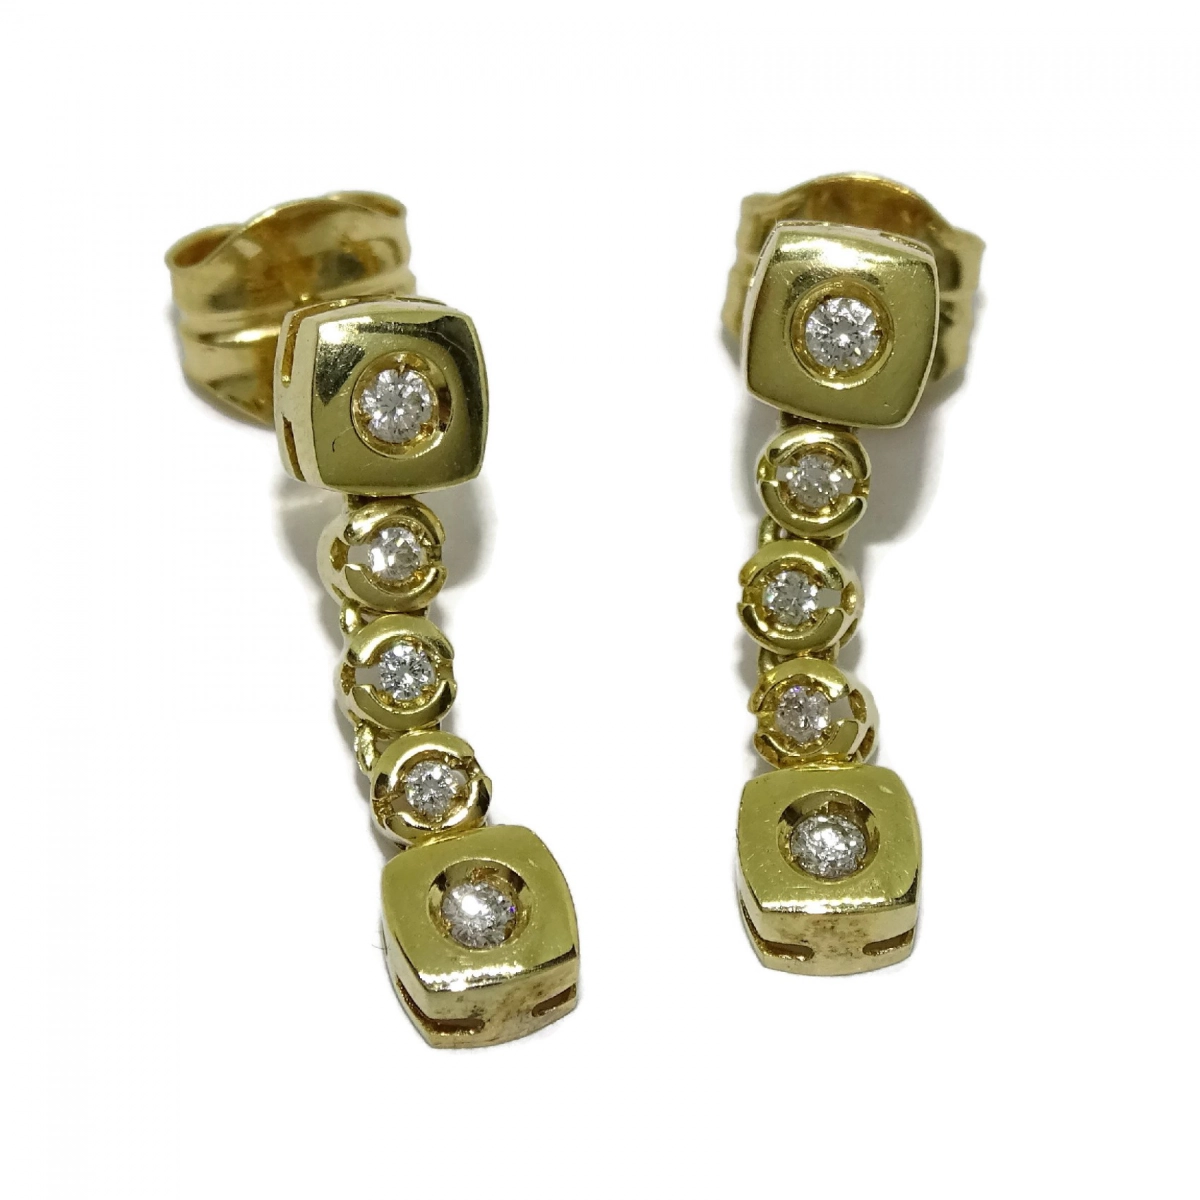 Earrings with 0.22cts of diamonds and yellow gold from 18Ktes. Never say never pressure